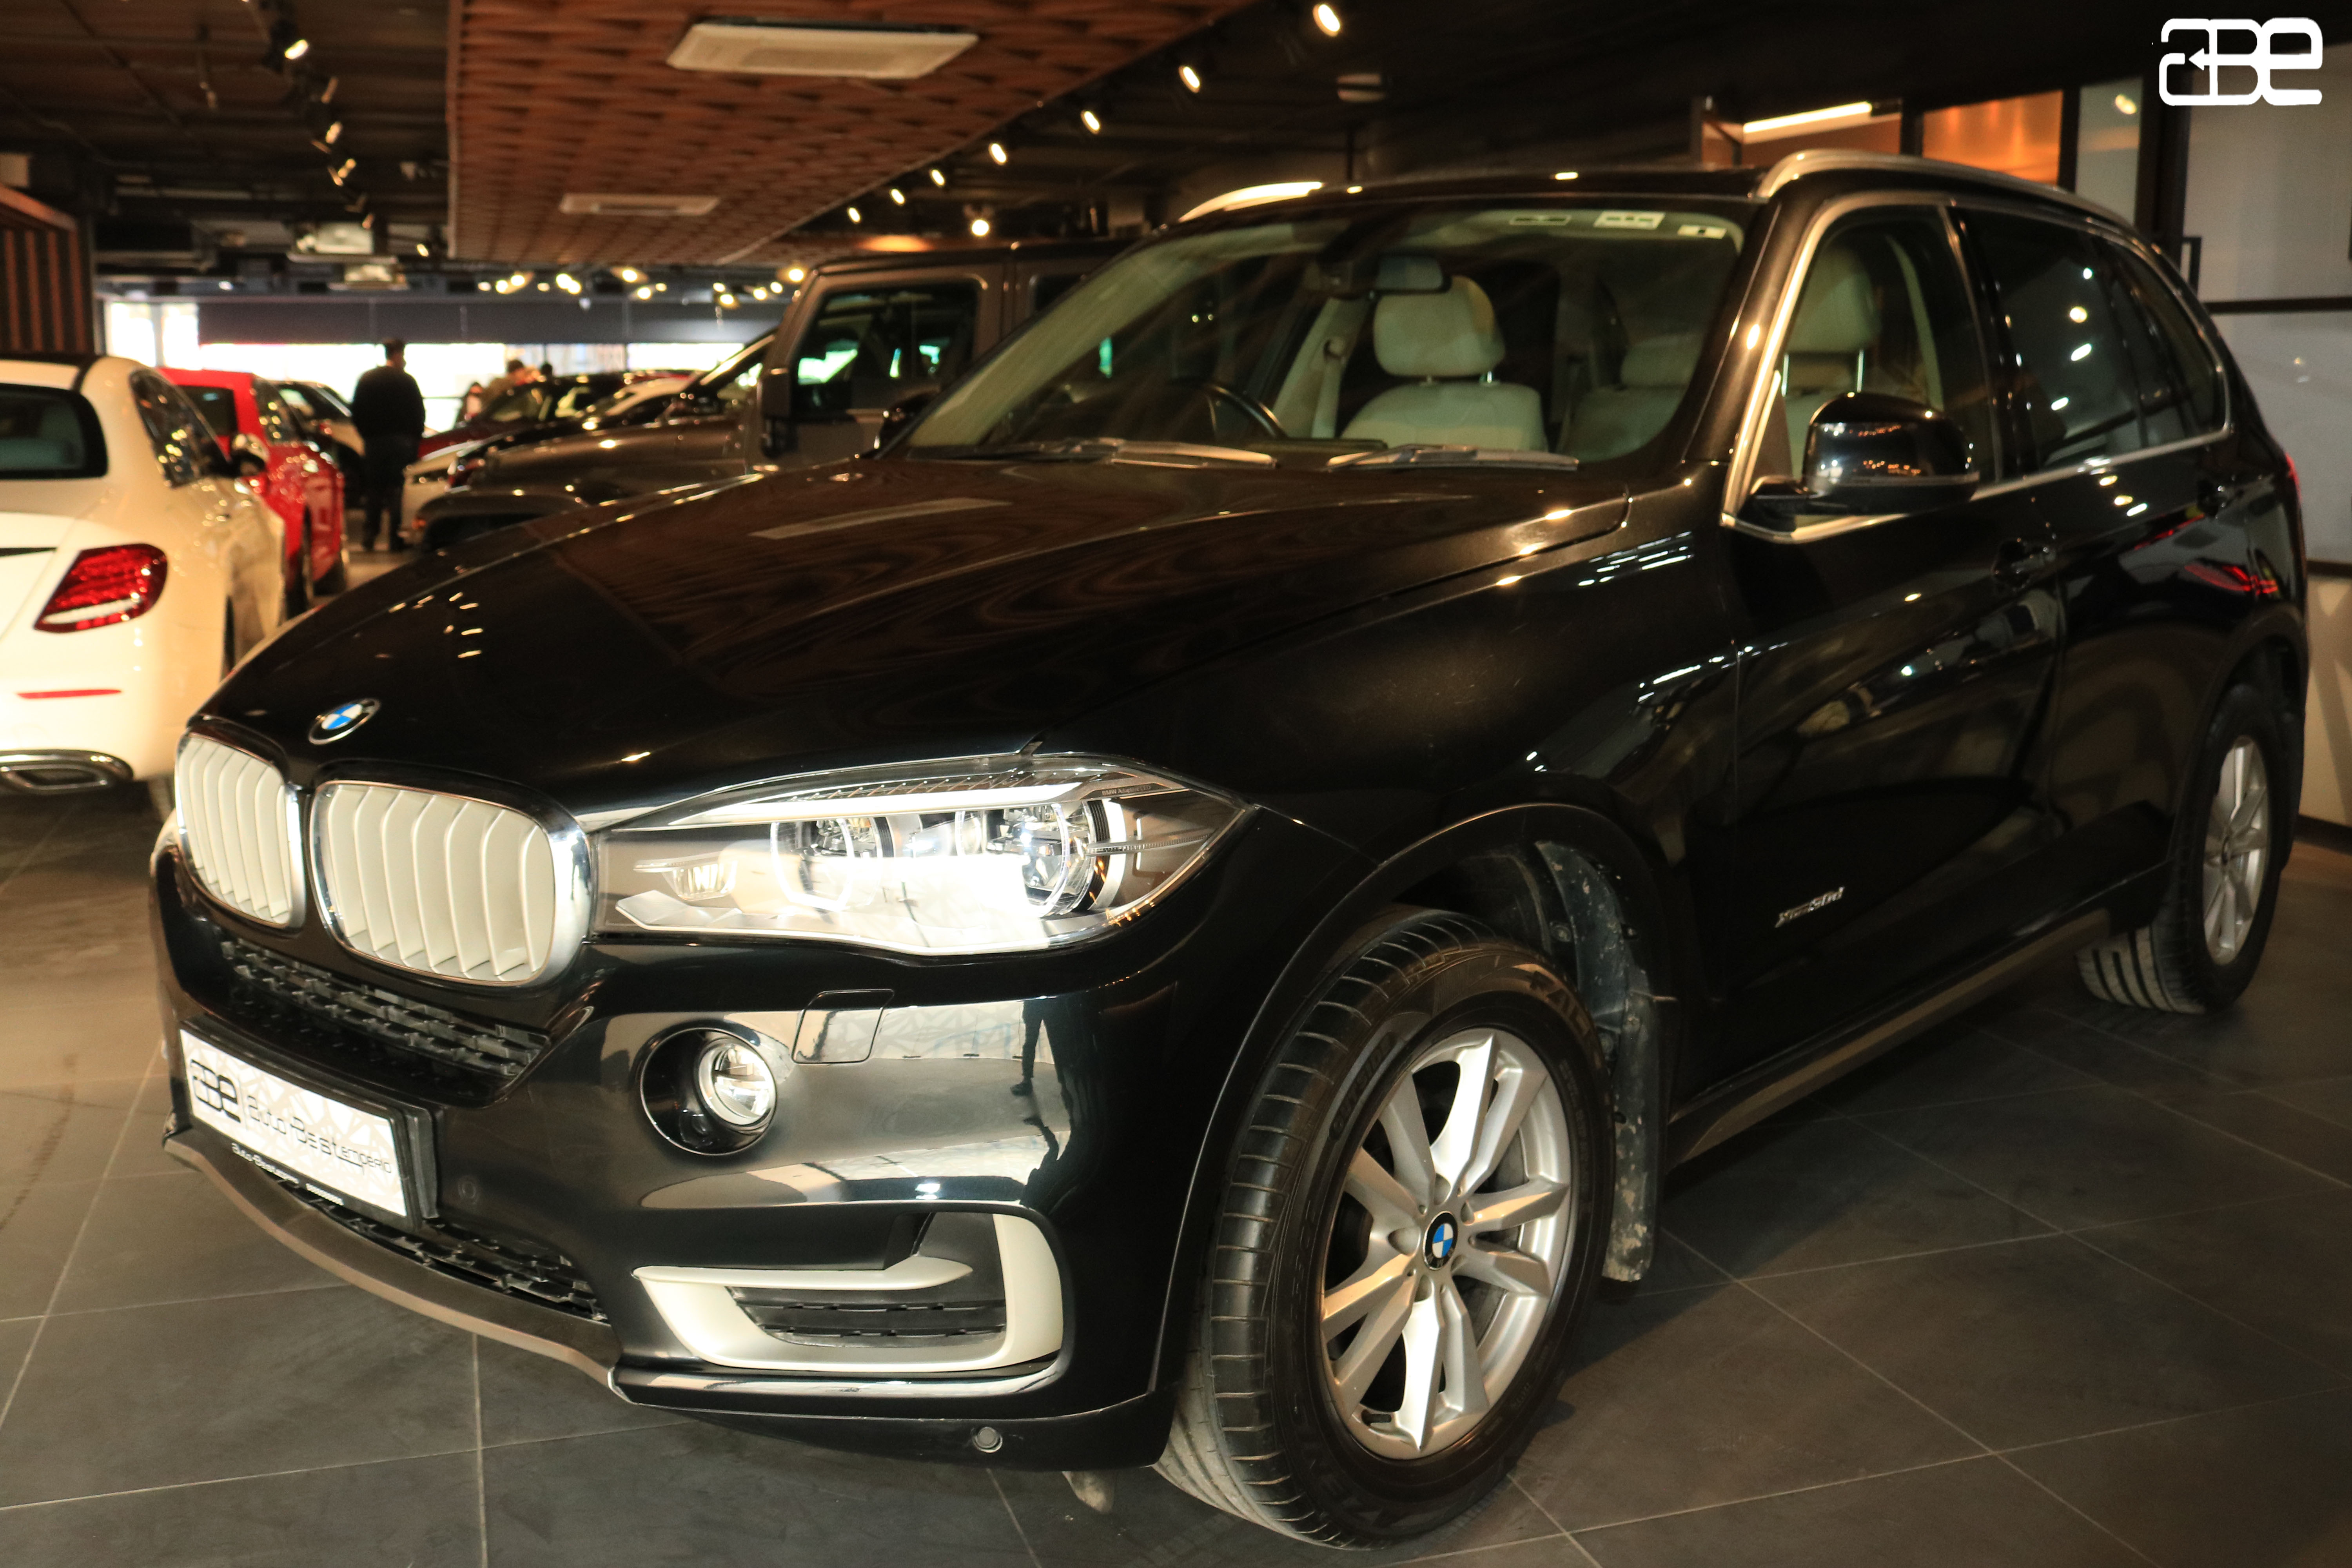 BMW X5 7-SEATER DPE-7 2015 - Buy Used BMW In Delhi at Best Price | ABE